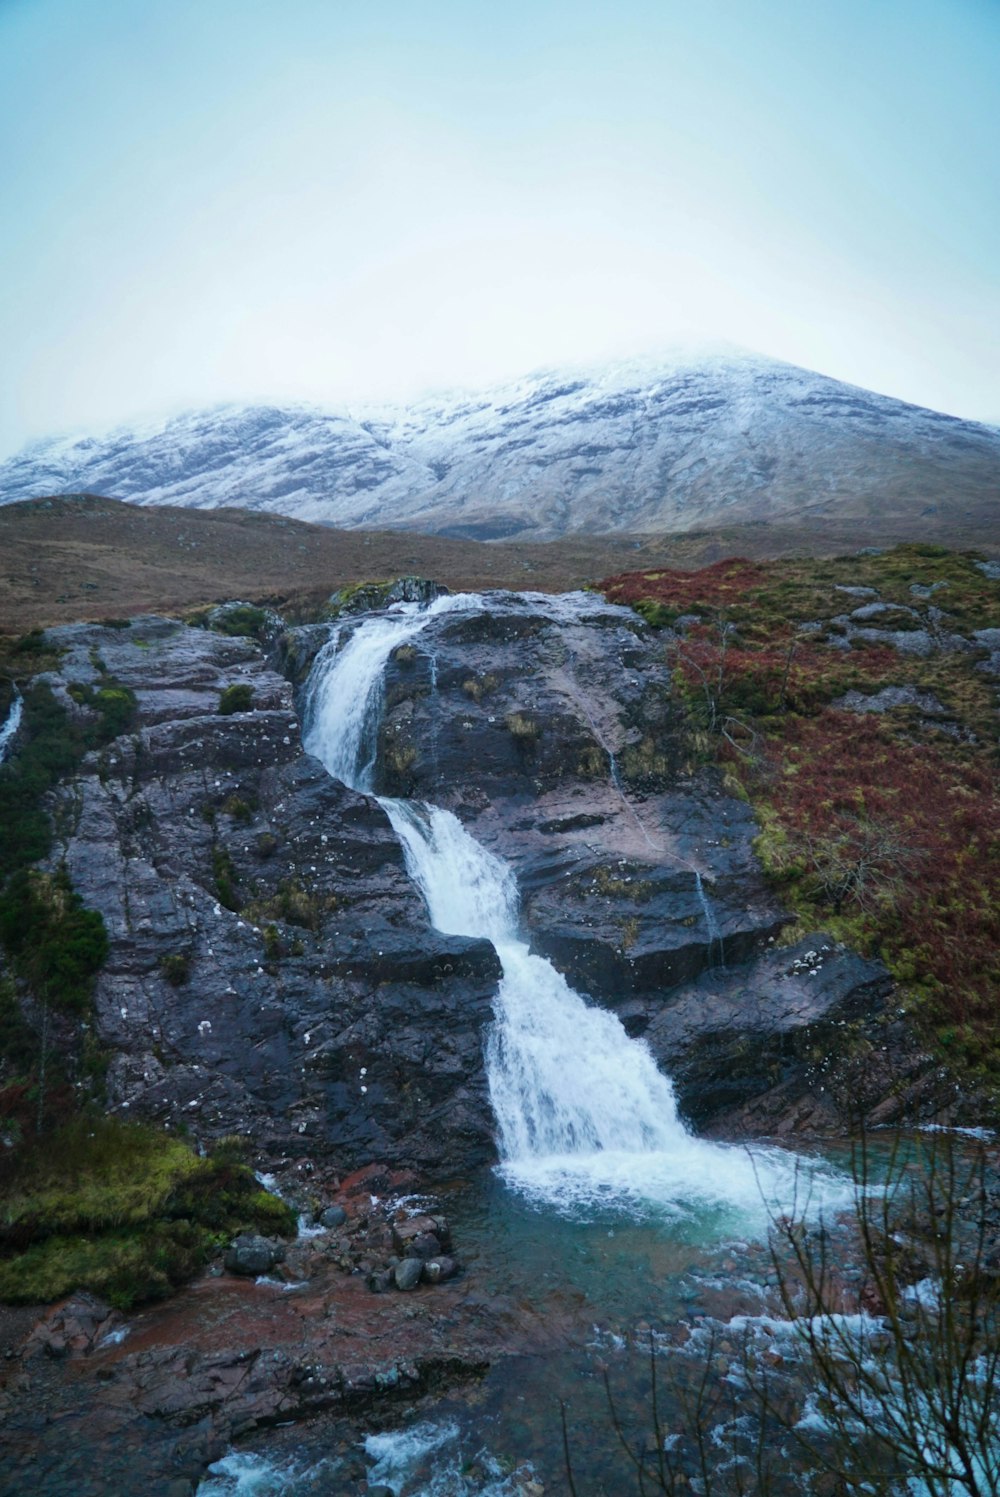 waterfalls near brown and green mountain under white sky during daytime